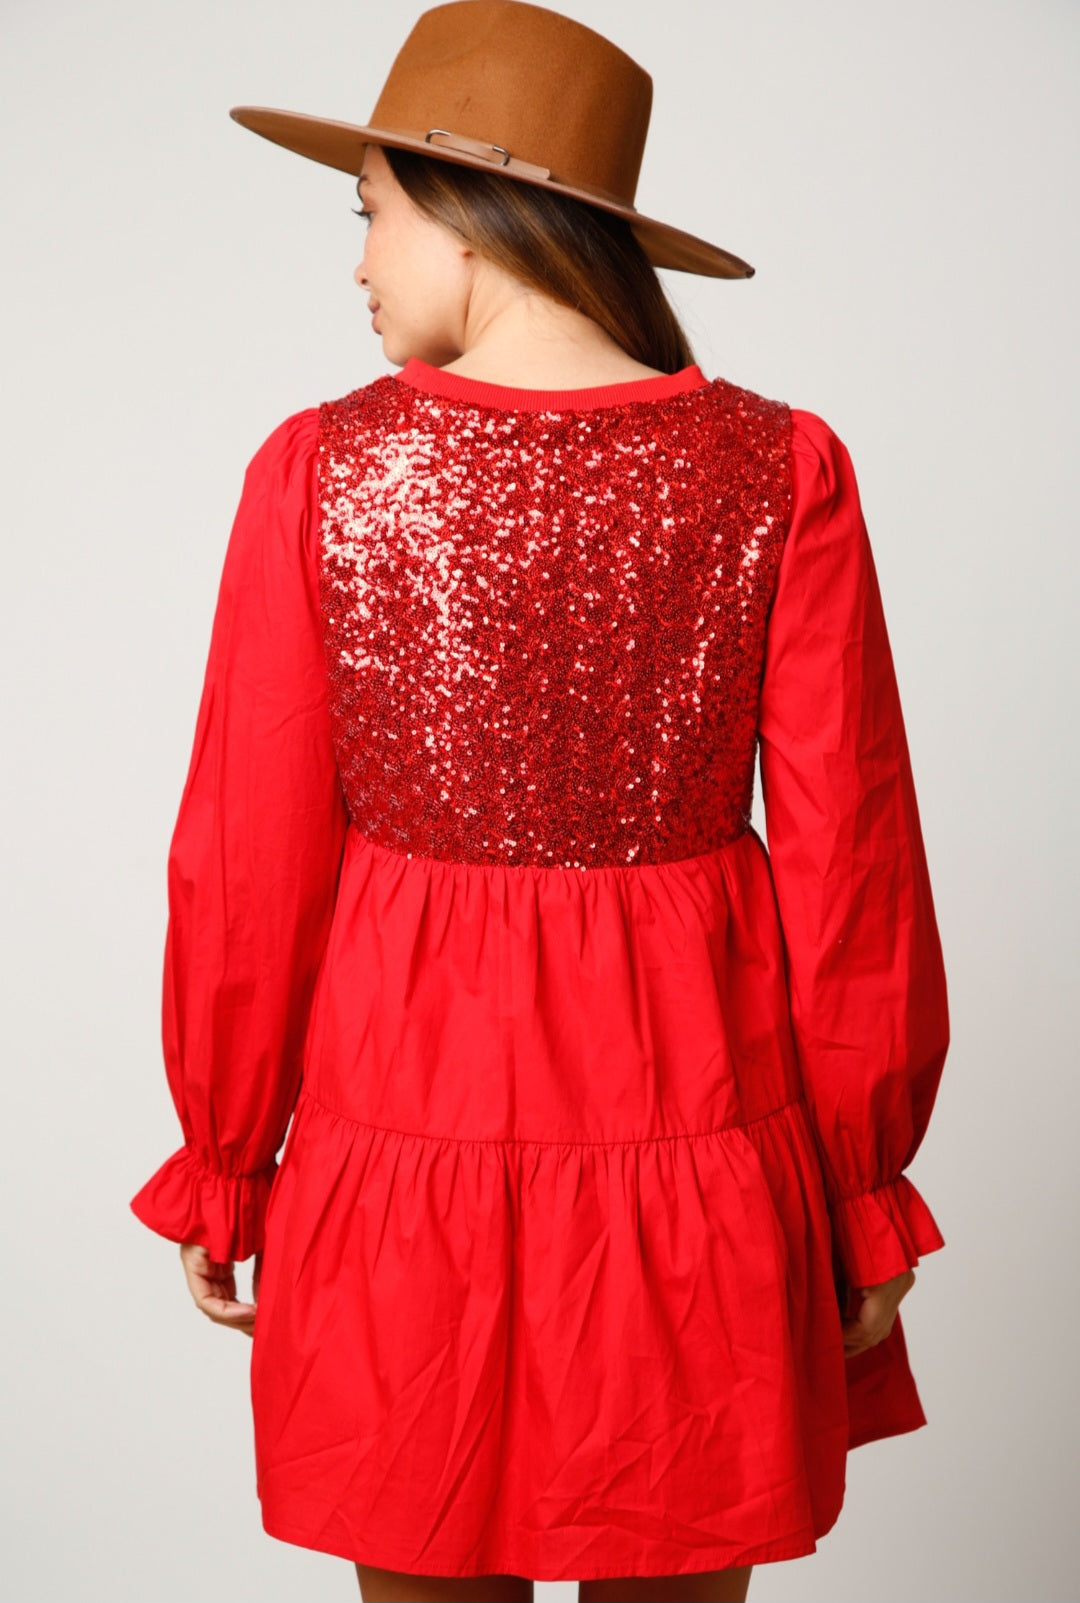 Have Fun Sequins dress in red